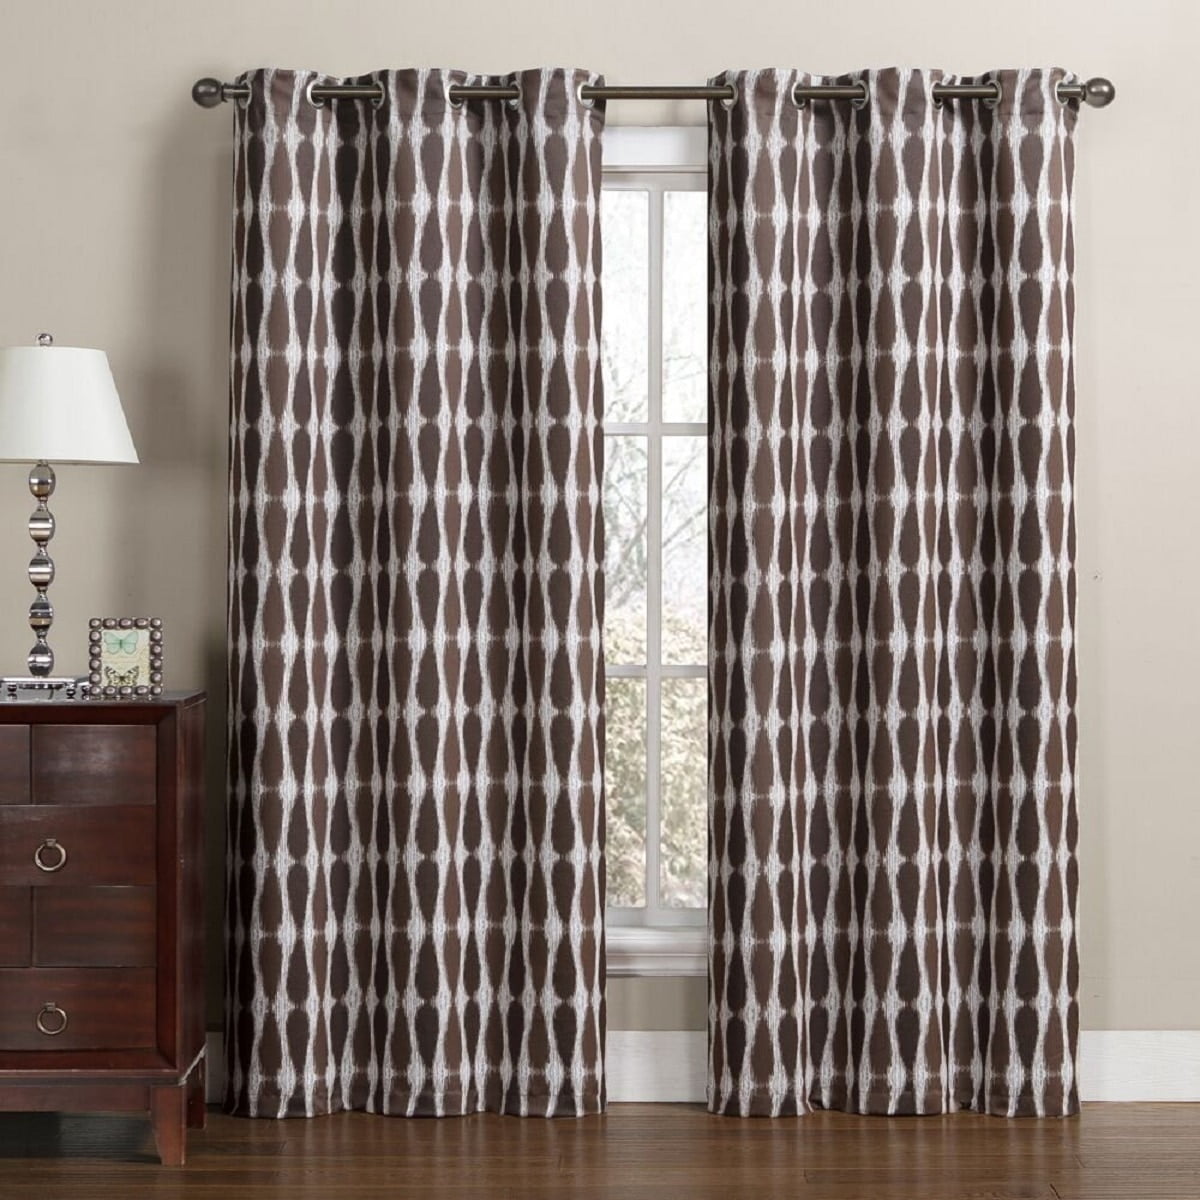 Pair Stylish Justin Printed Blackout Window Grommet Top Curtain Panels76”Wx84”L 